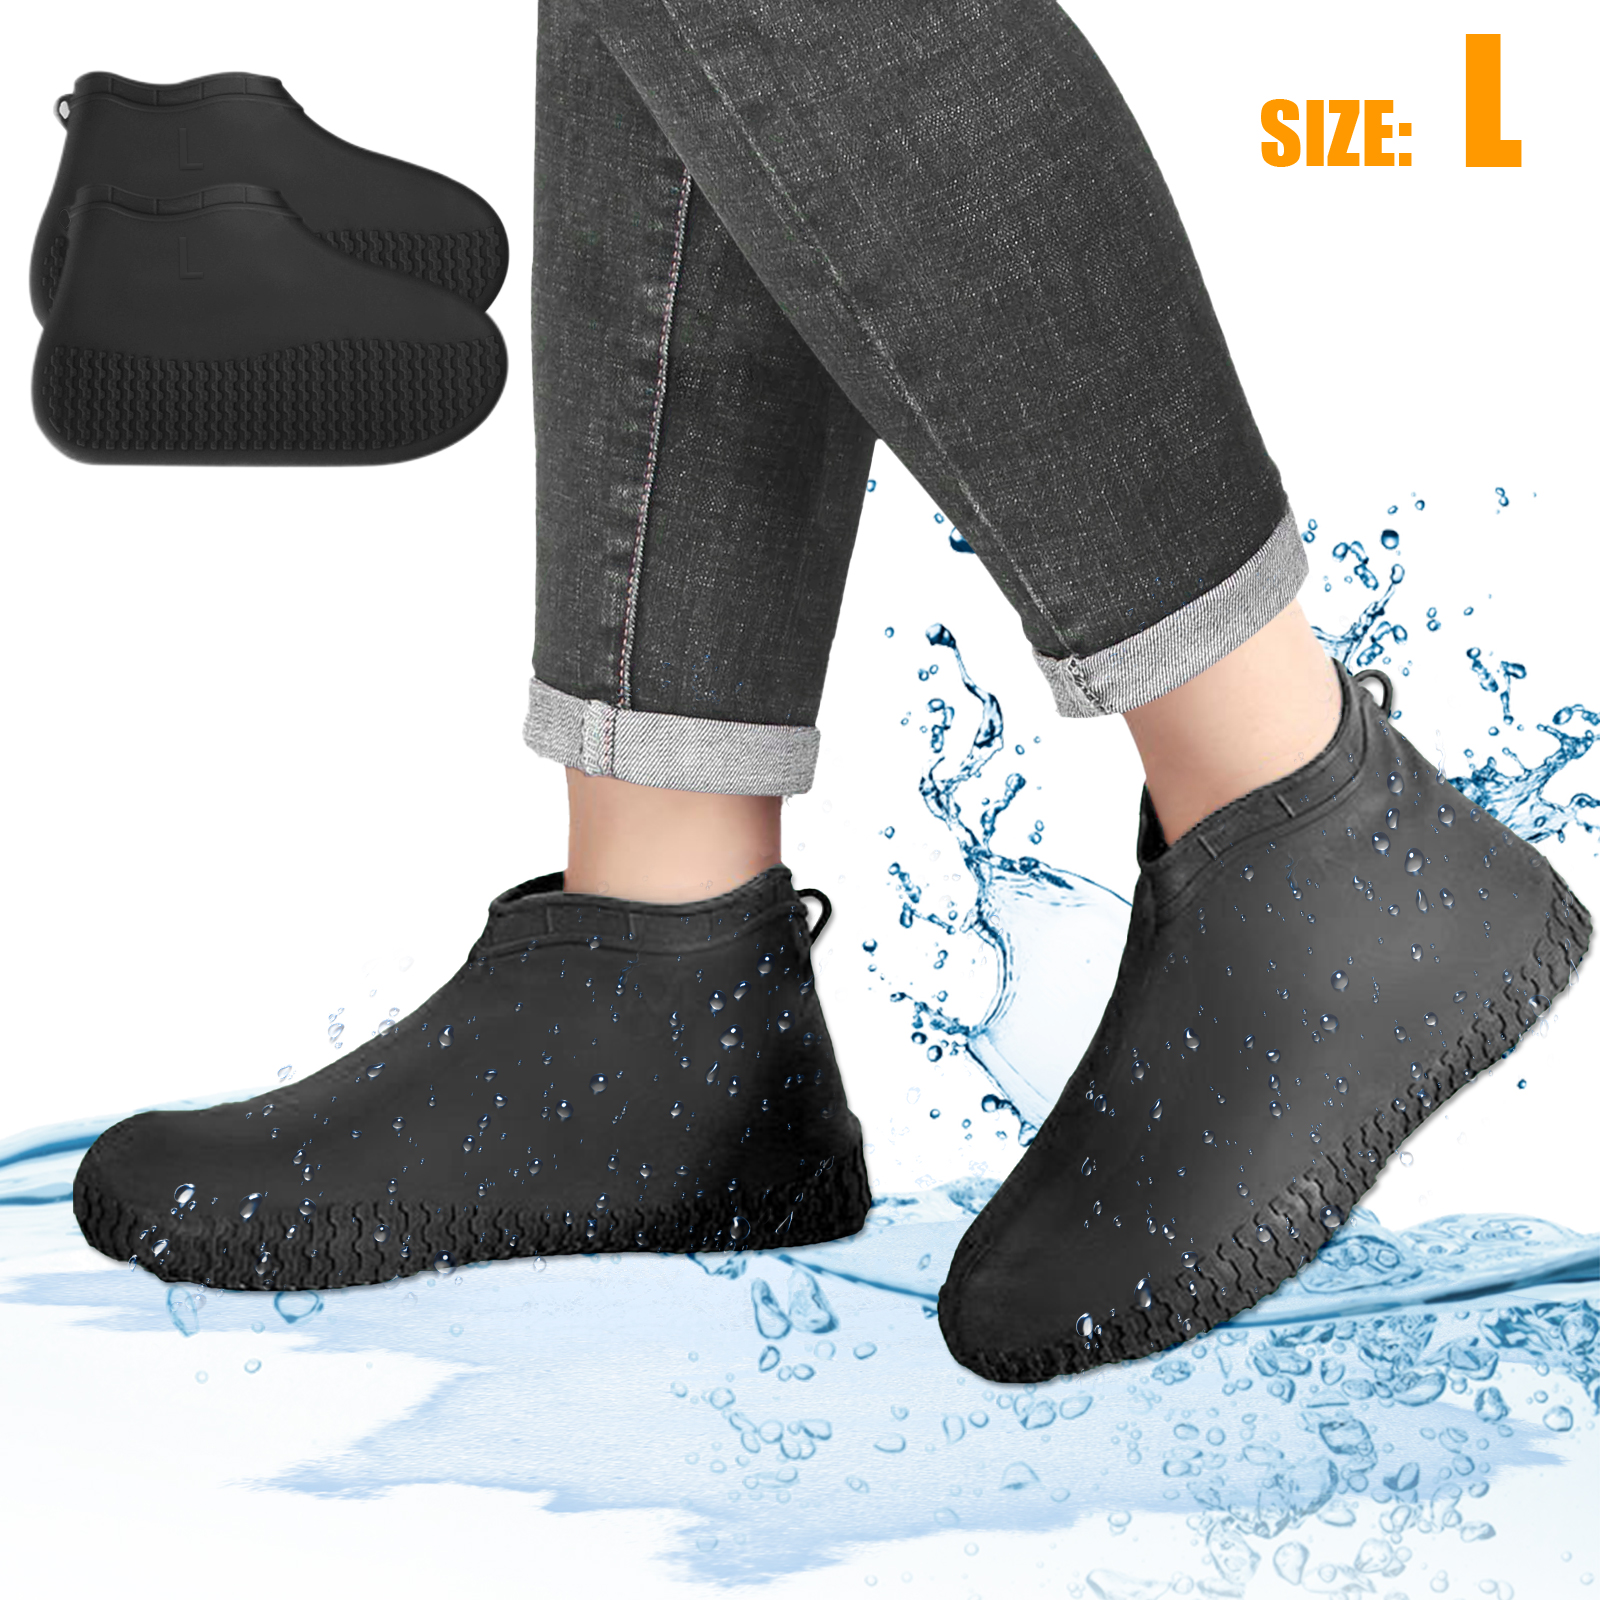 Motorcycle Overshoes Rain Waterproof Shoe Covers Boot Cover Protector Recyclable 